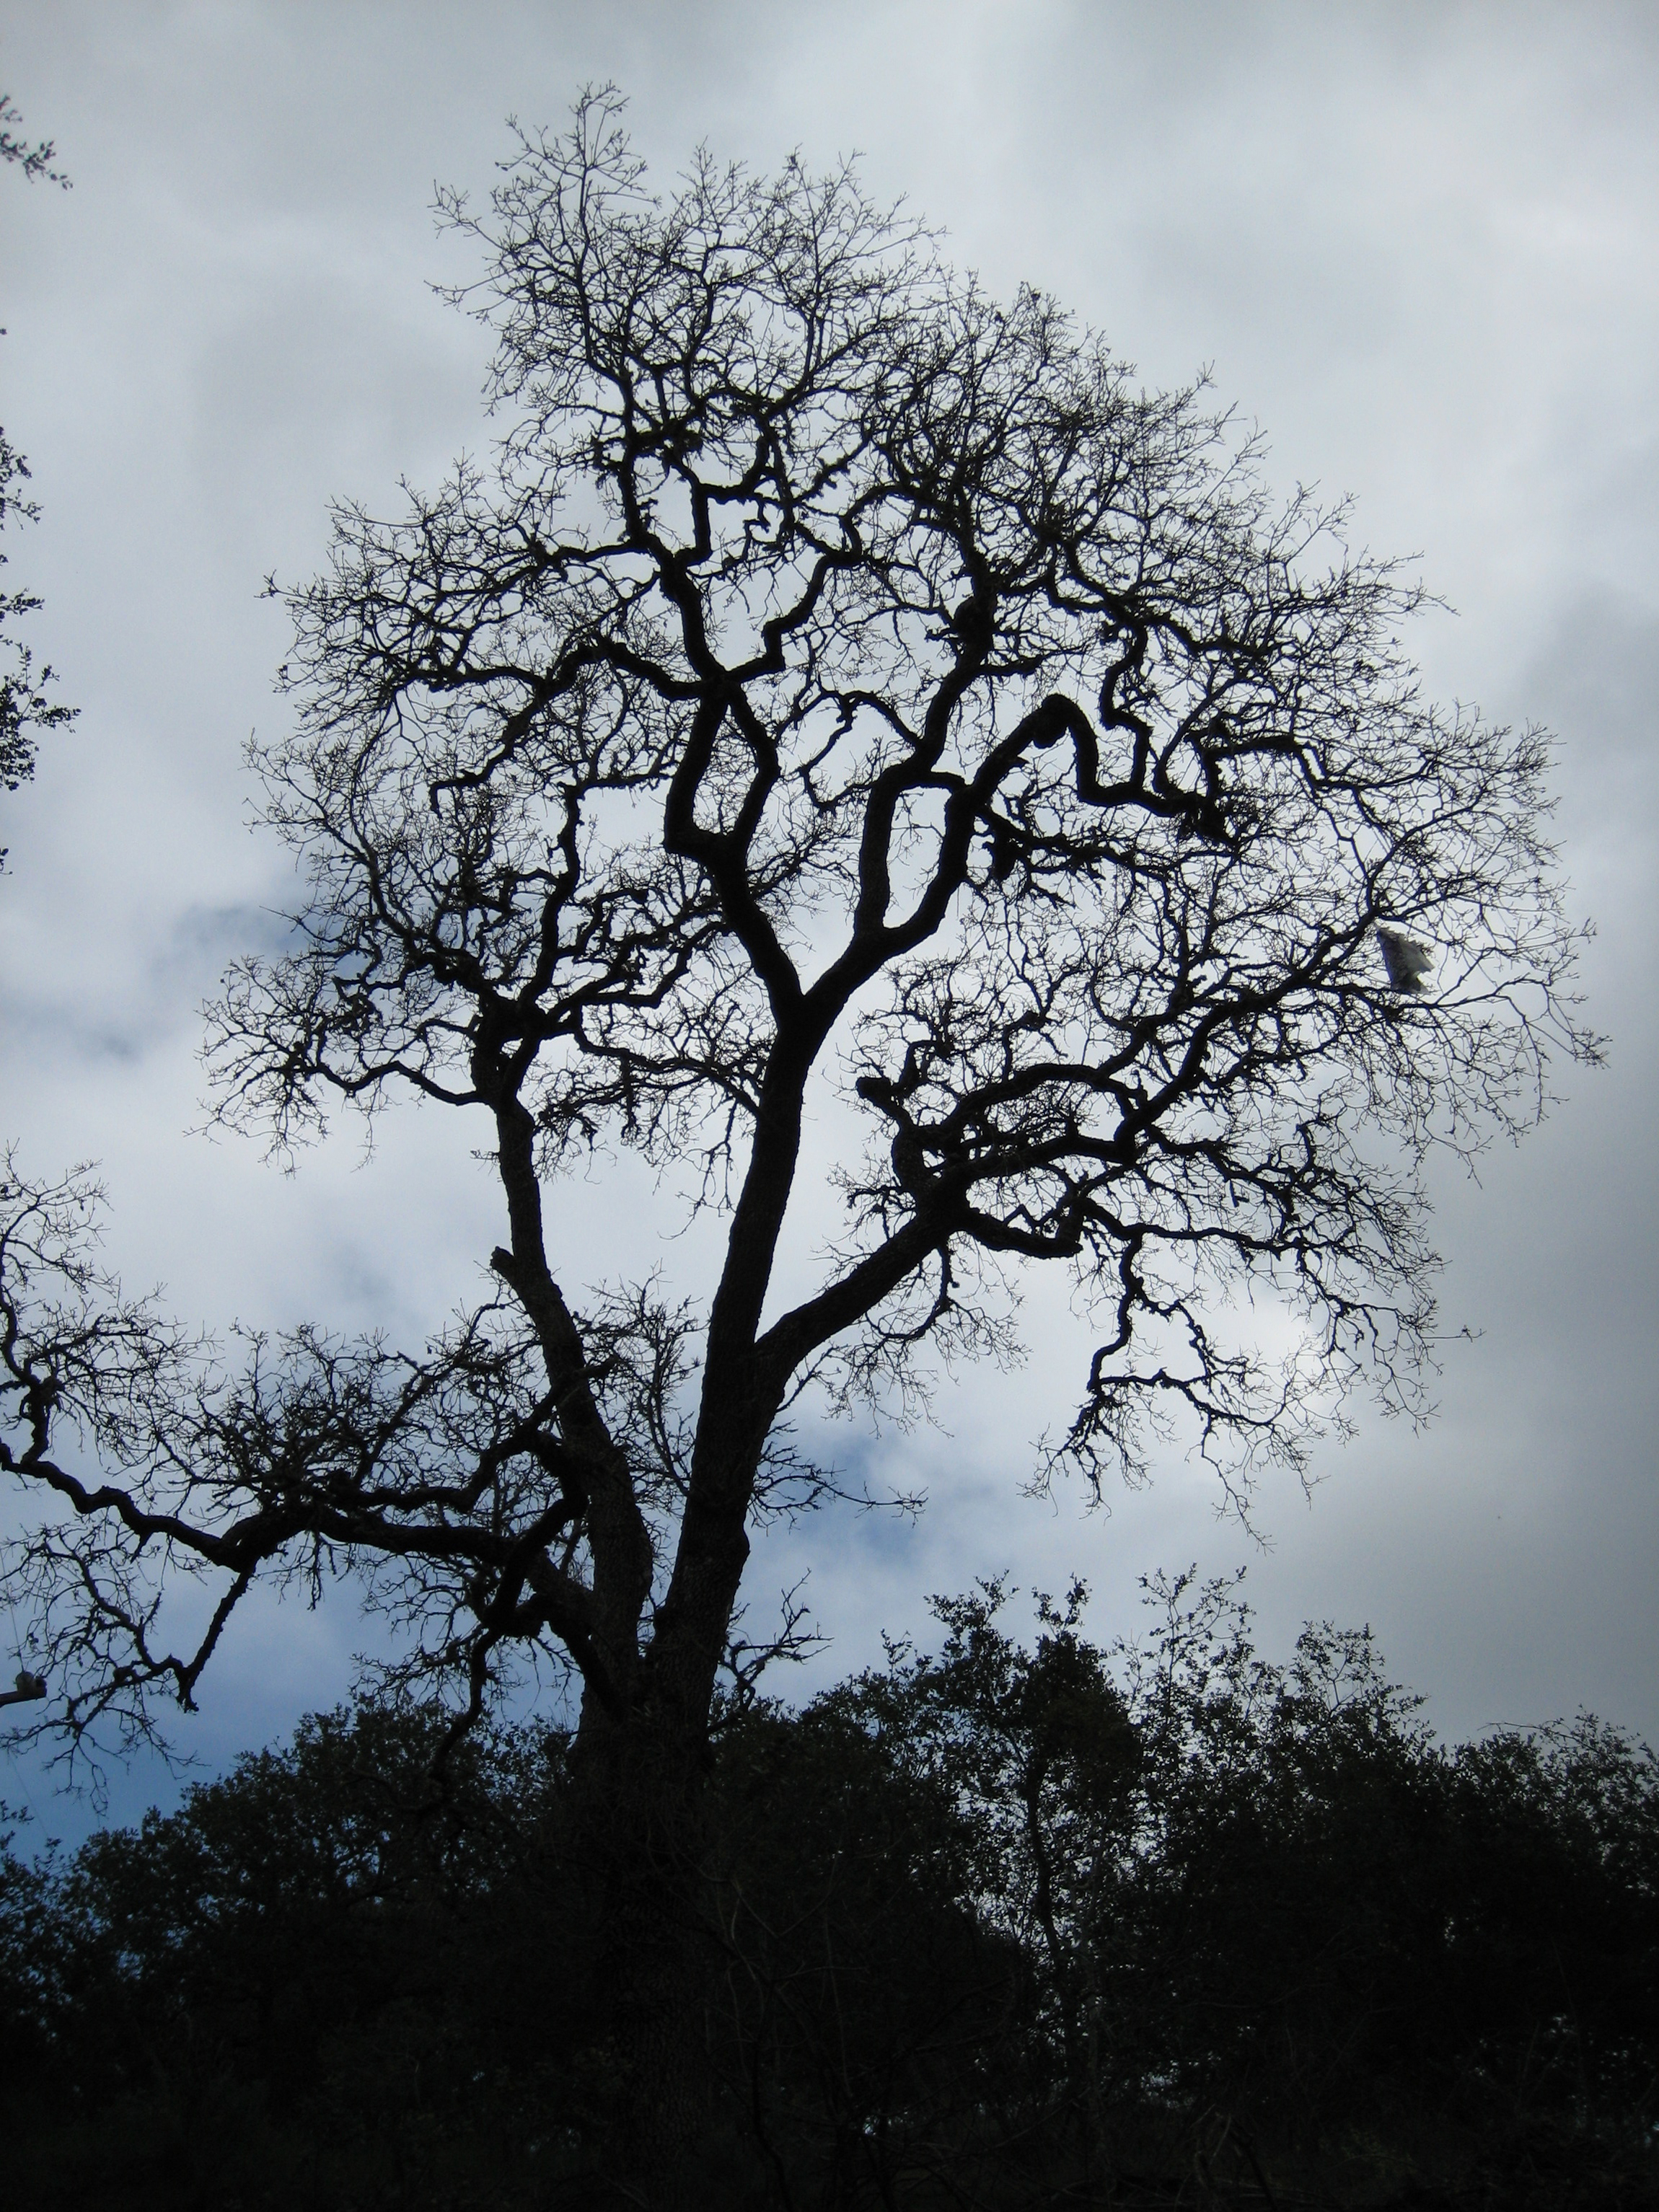 Black silhouette of a tree against white clouds. 